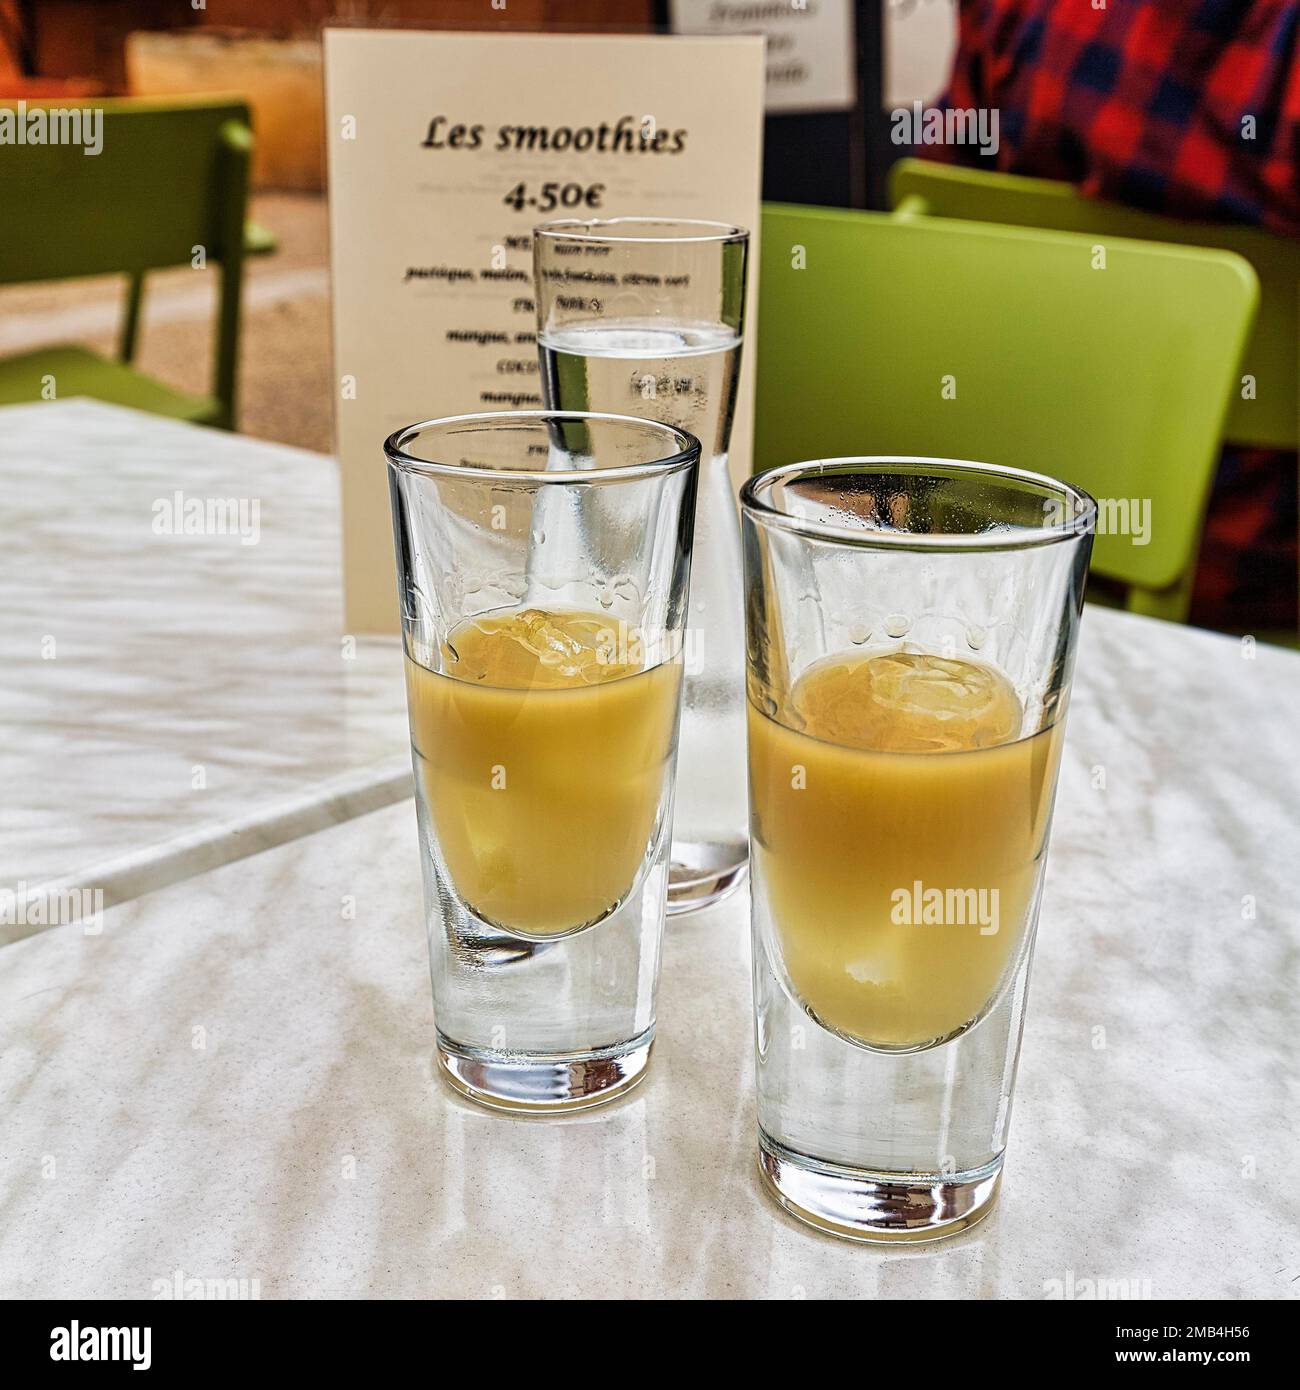 Two glasses of Pastis with ice on a table in the restaurant, Old Town, Roussillon, Vaucluse, Provence, South of France, France Stock Photo